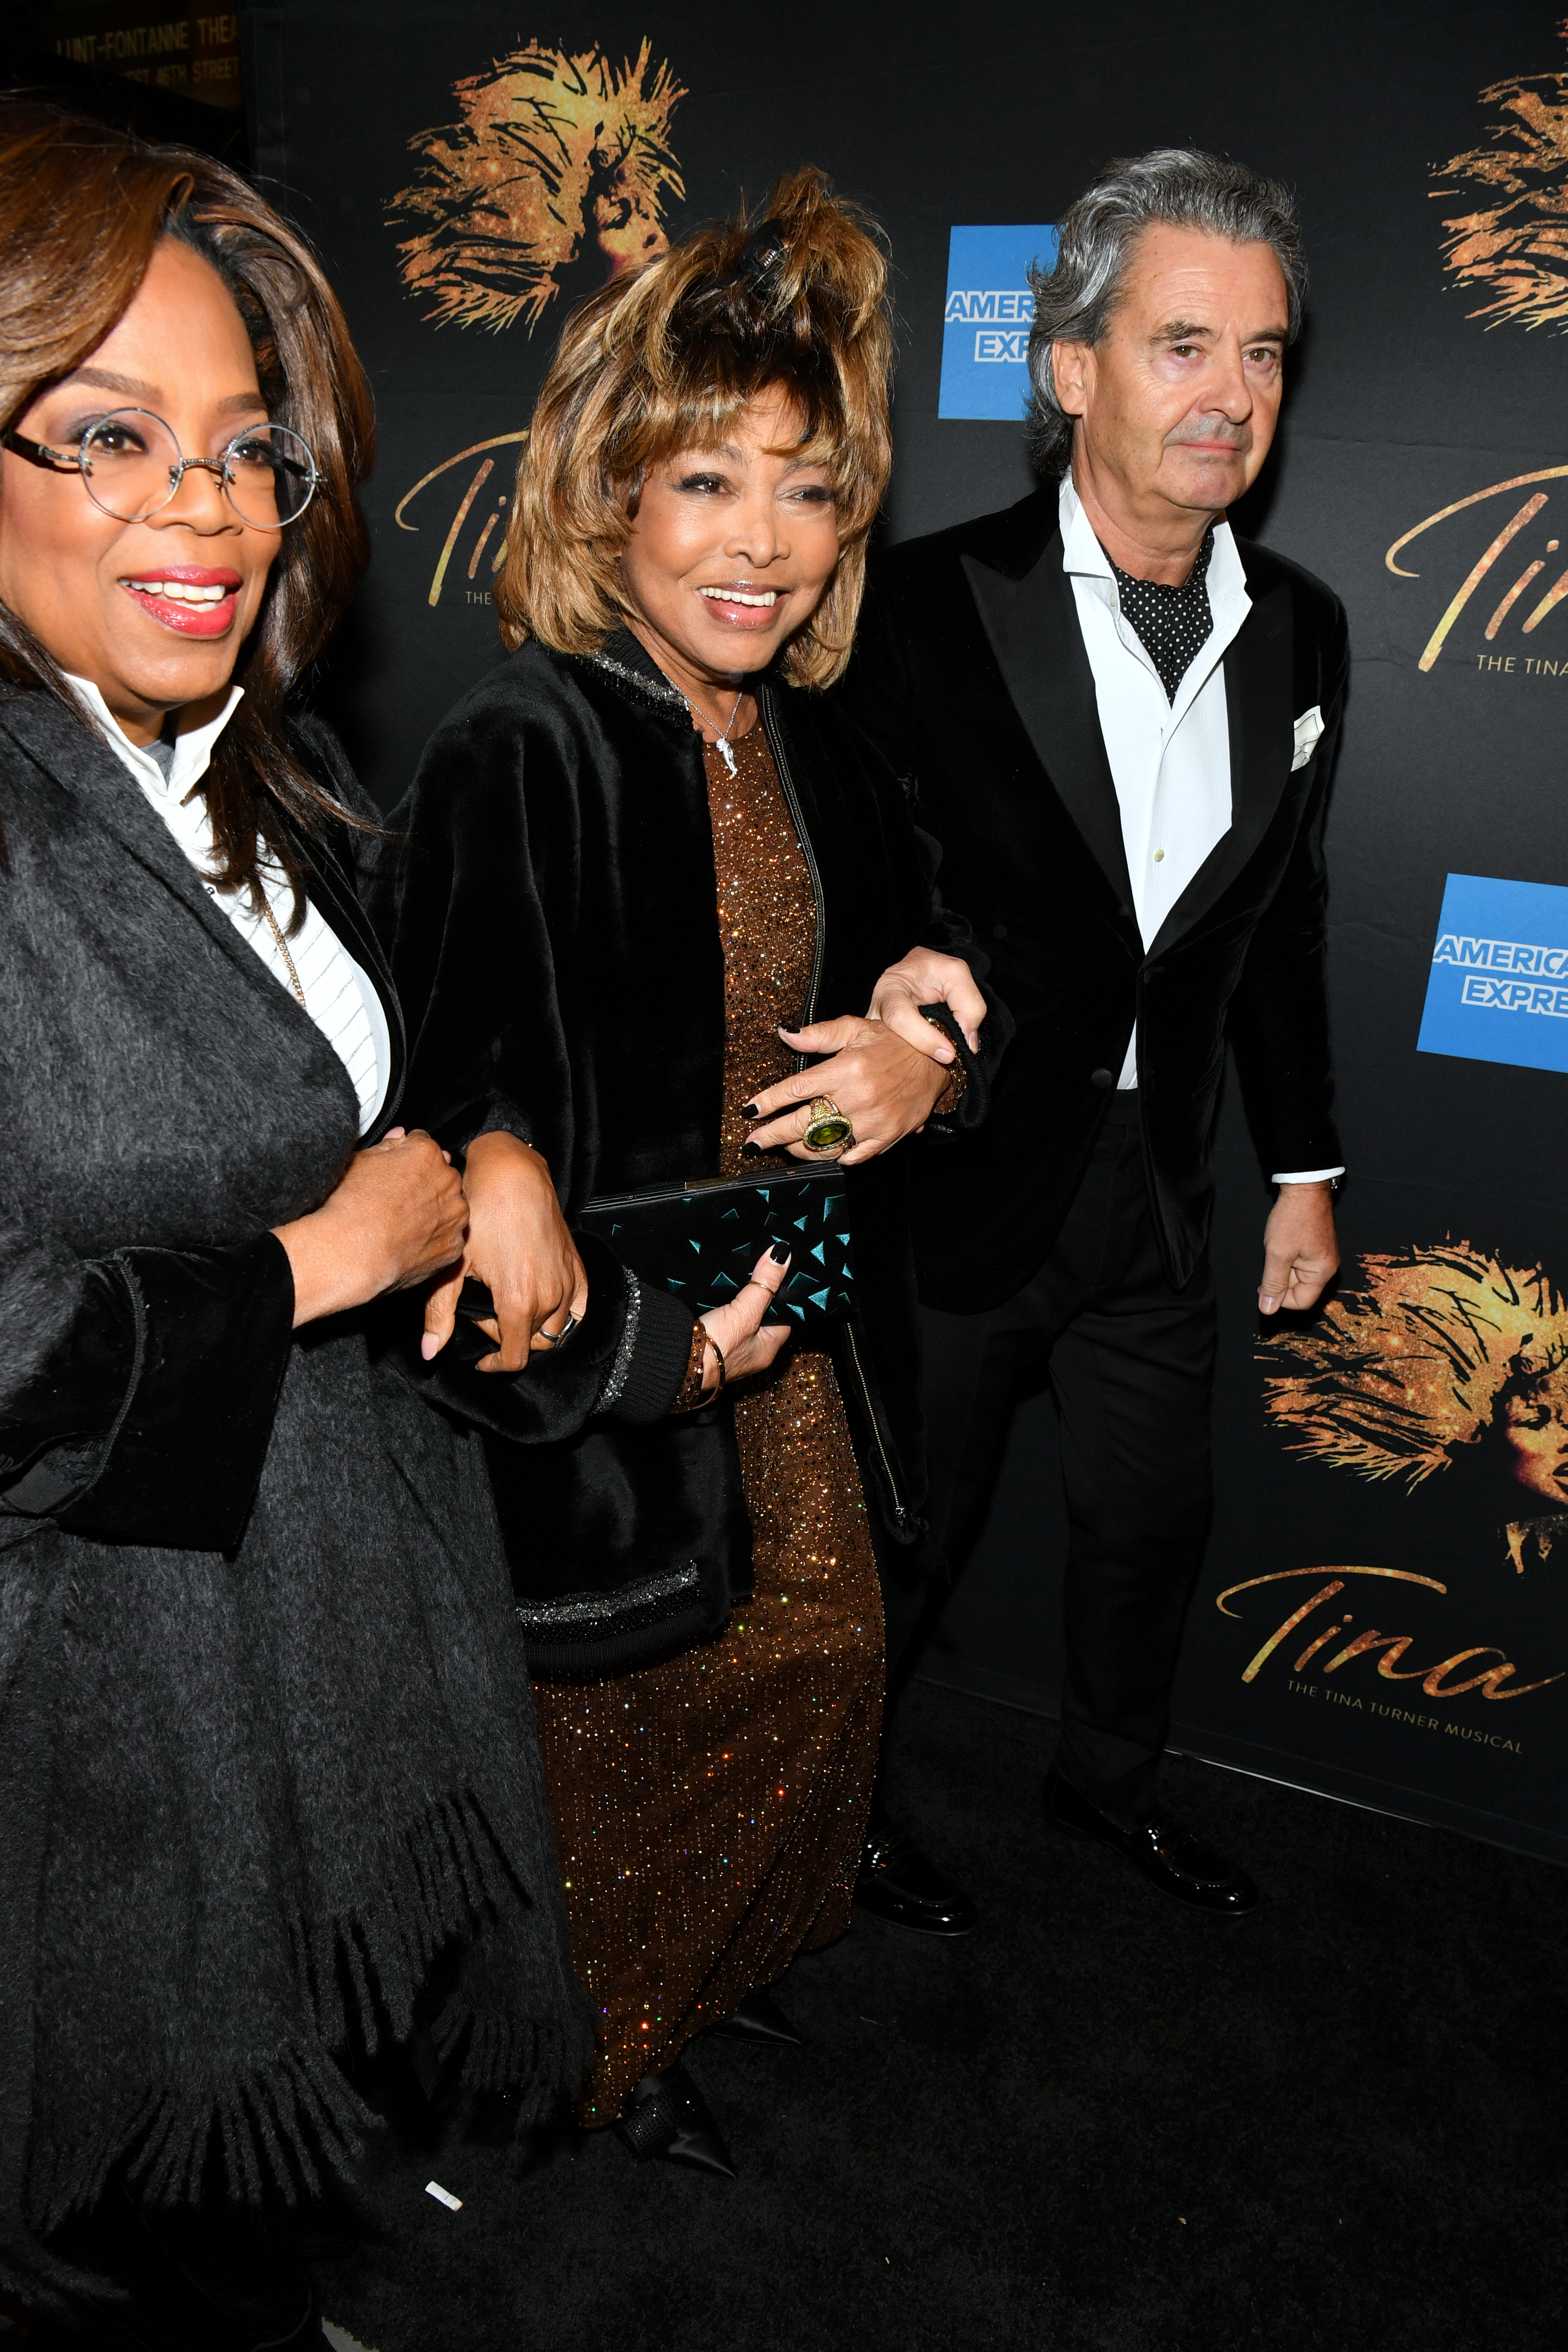 Oprah Winfrey, Tina Turner, and Erwin Bach at the opening night of Broadway's "Tina - The Tina Turner Musical" in New York on November 7, 2019 | Source: Getty Images